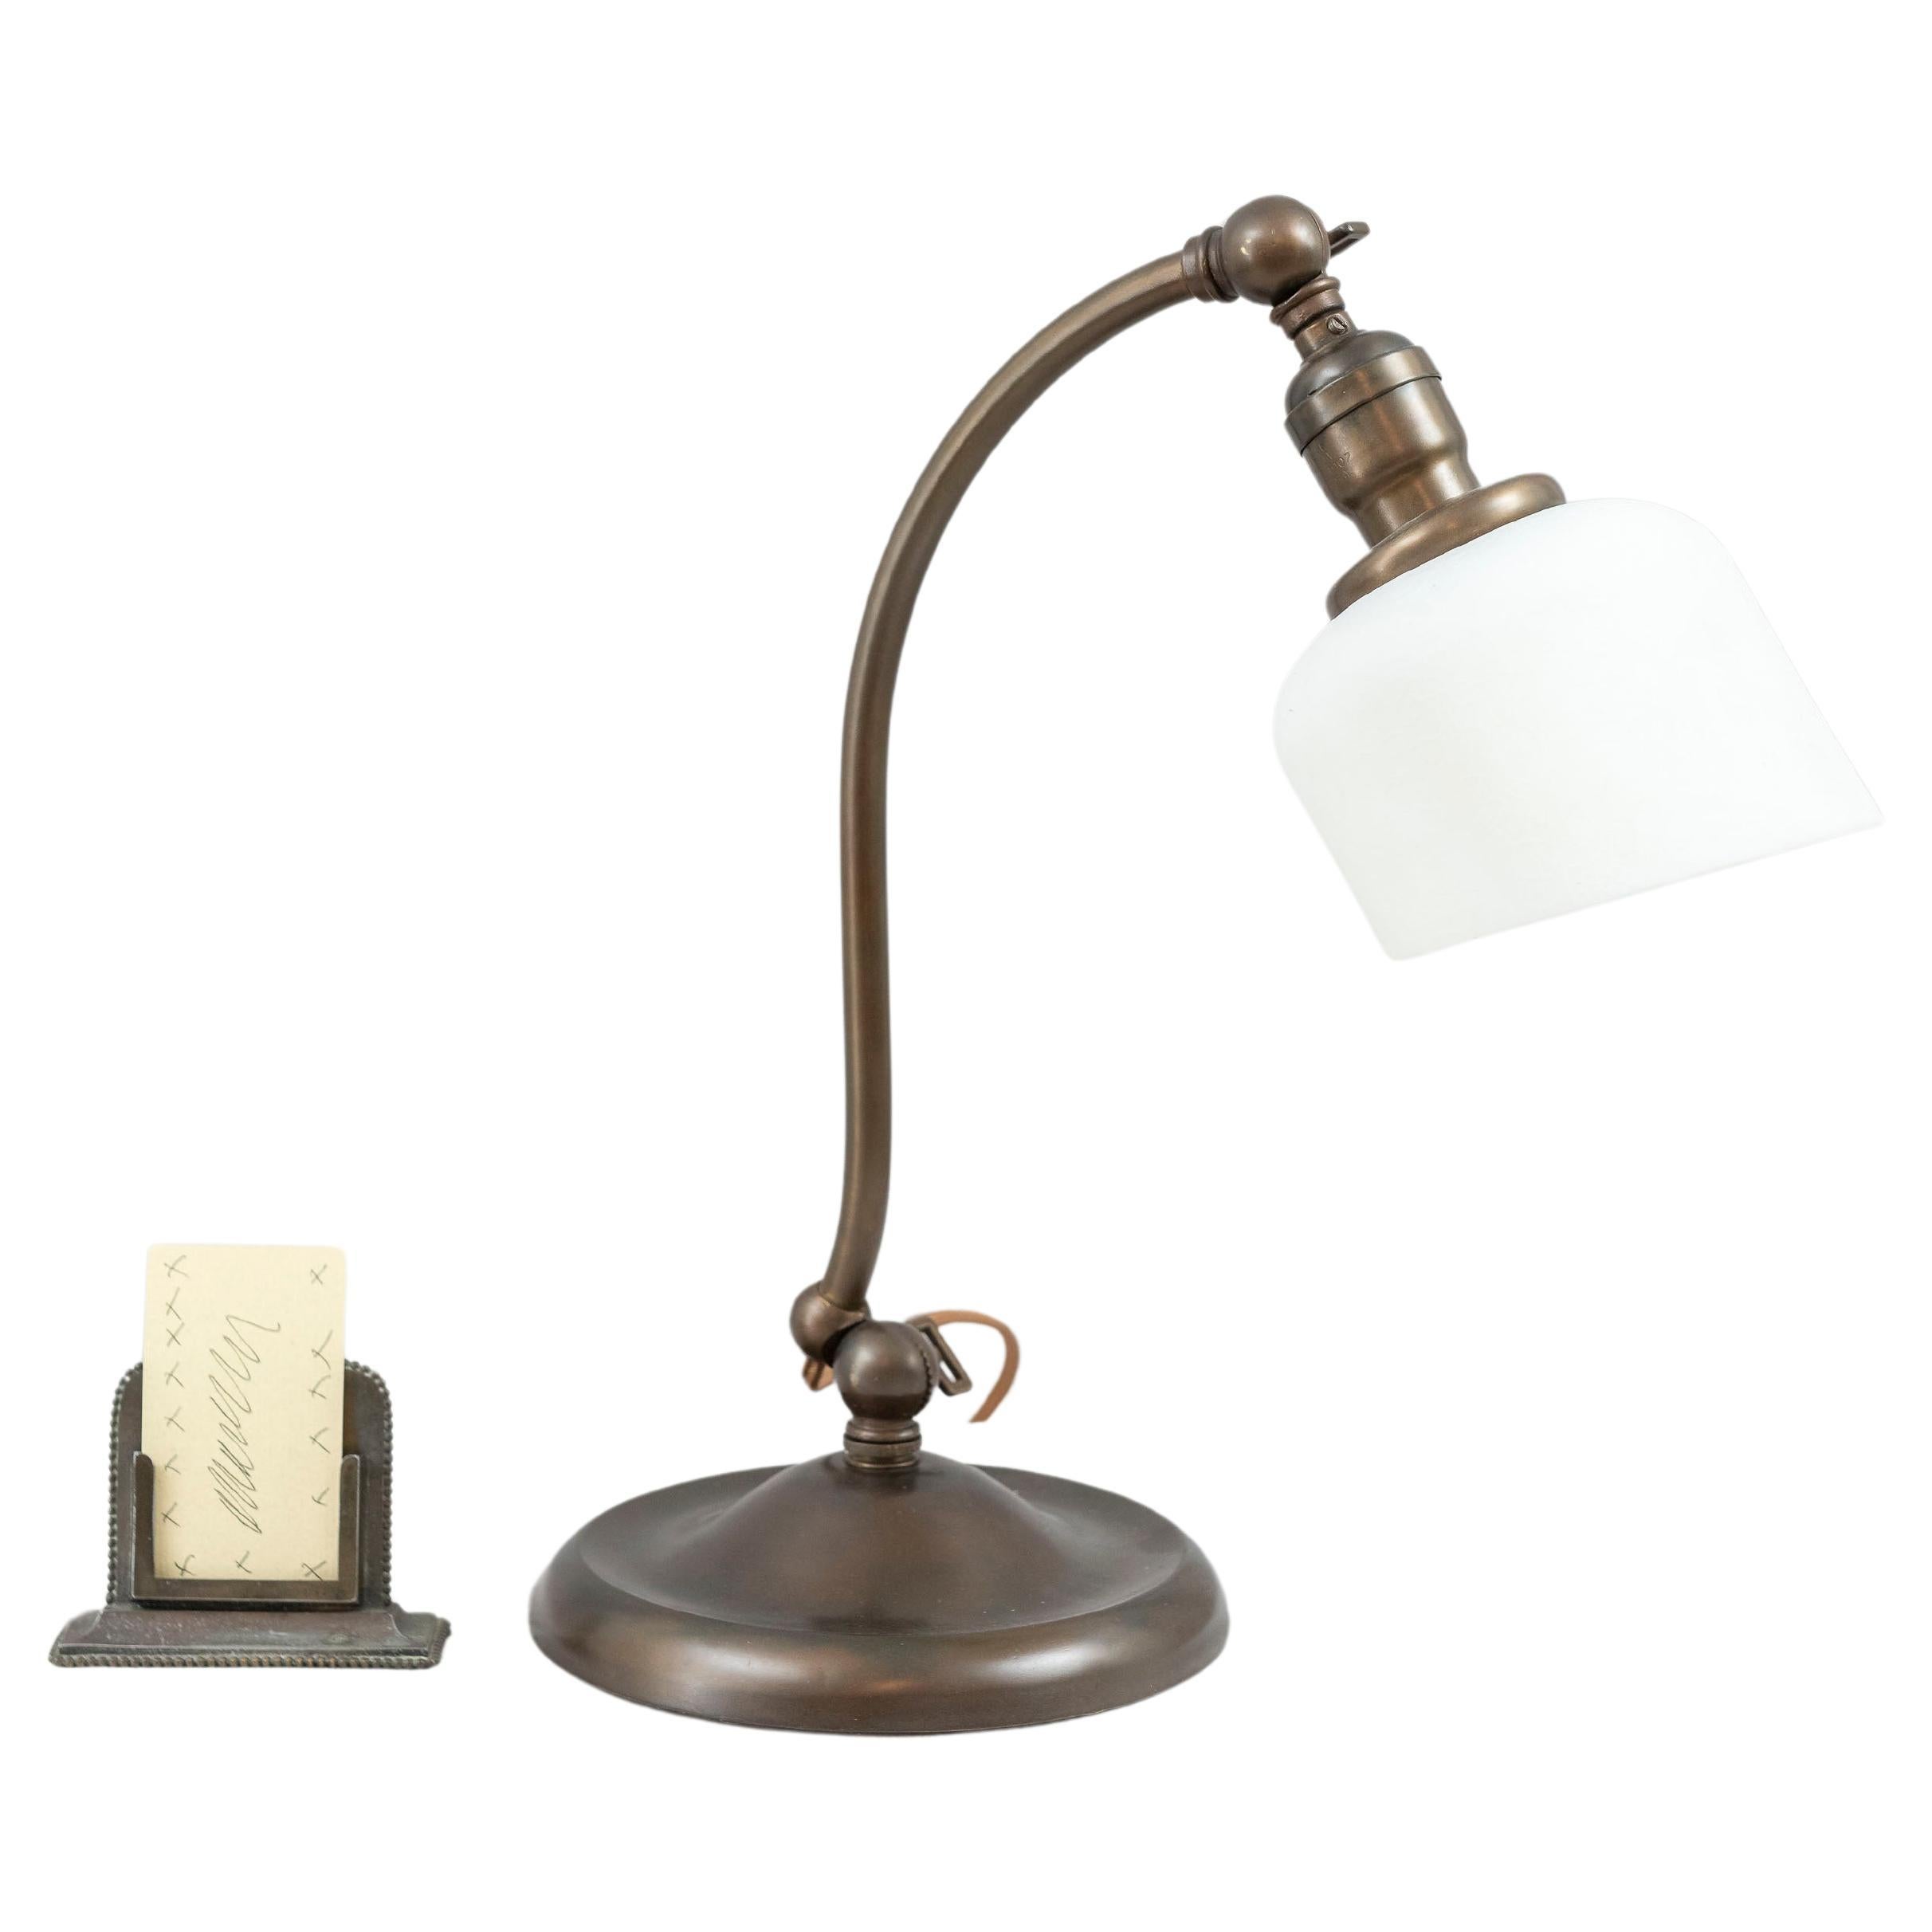 Brass Desk/Banker's Lamp w/ Double Adjustment and Art Glass Shade, ca. 1910